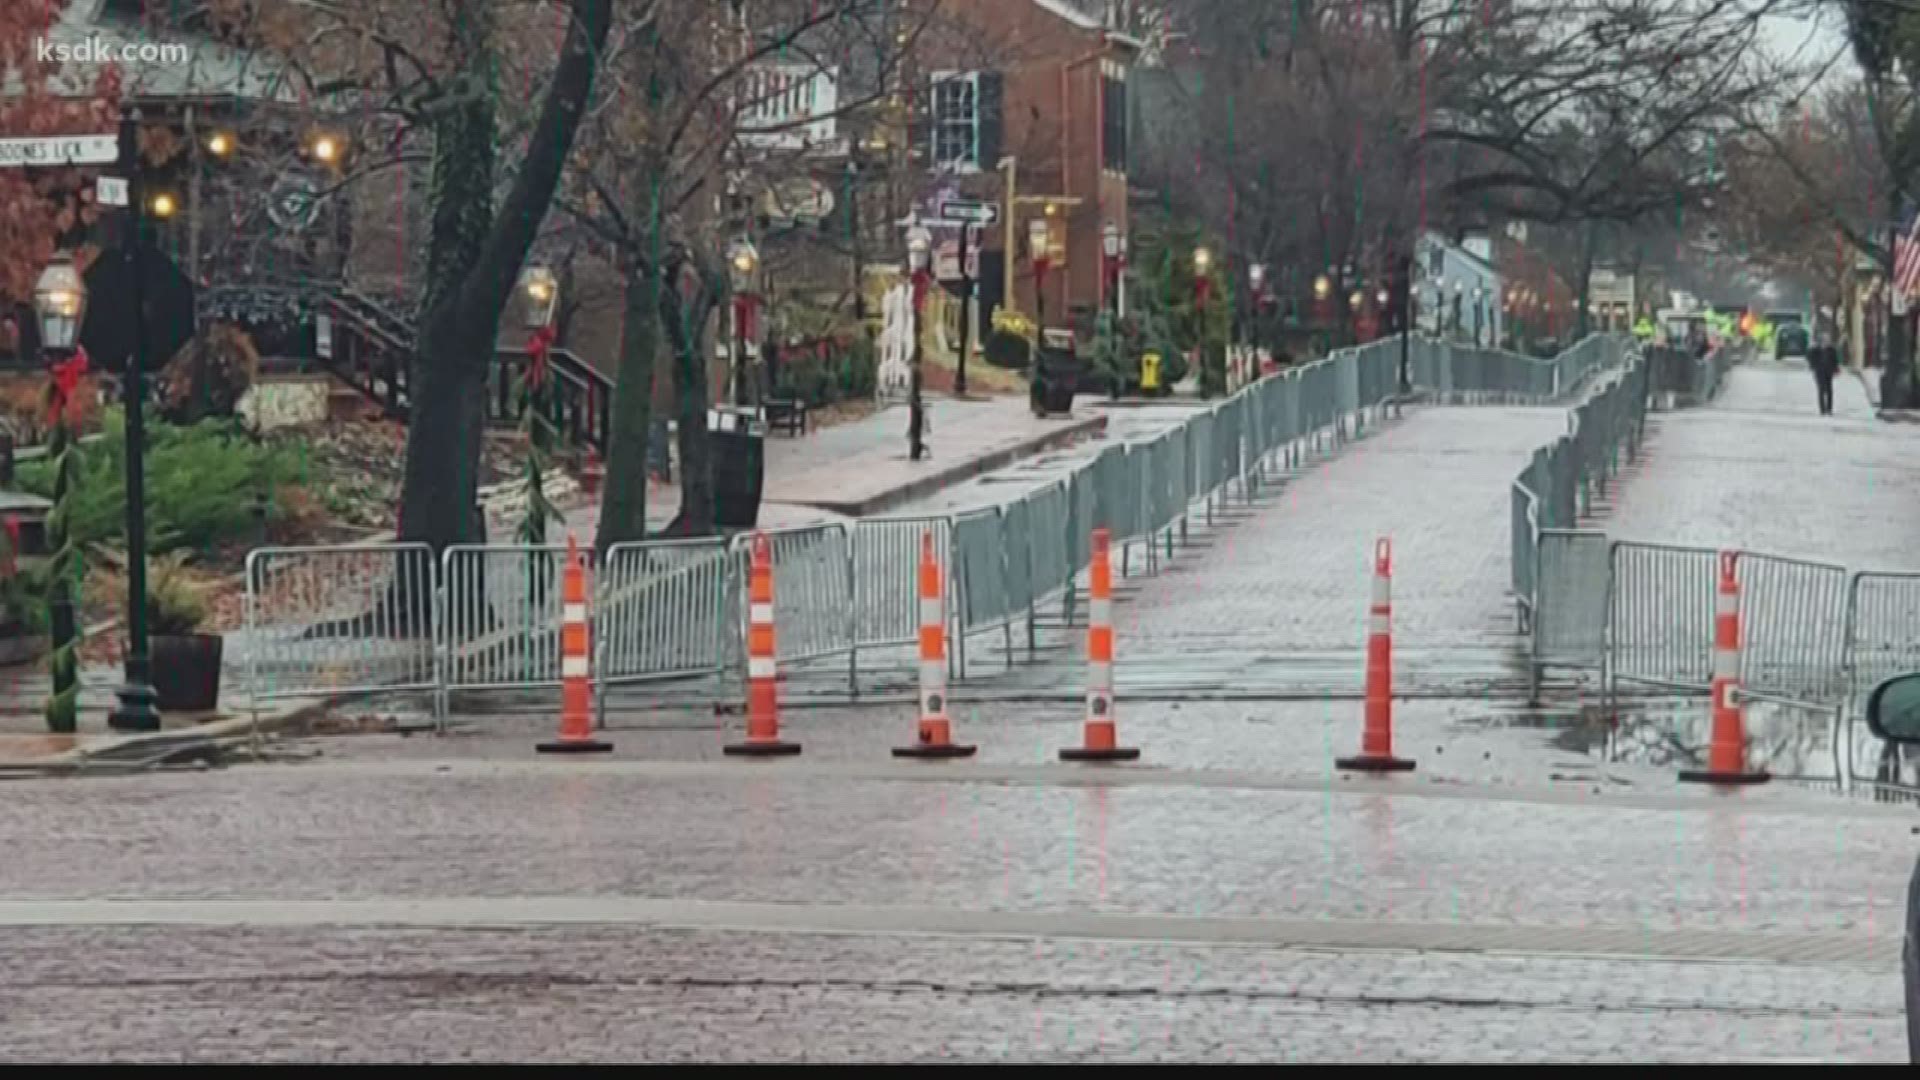 Business owners along Main Street in St. Charles sued the city for installing barriers in front of their businesses.